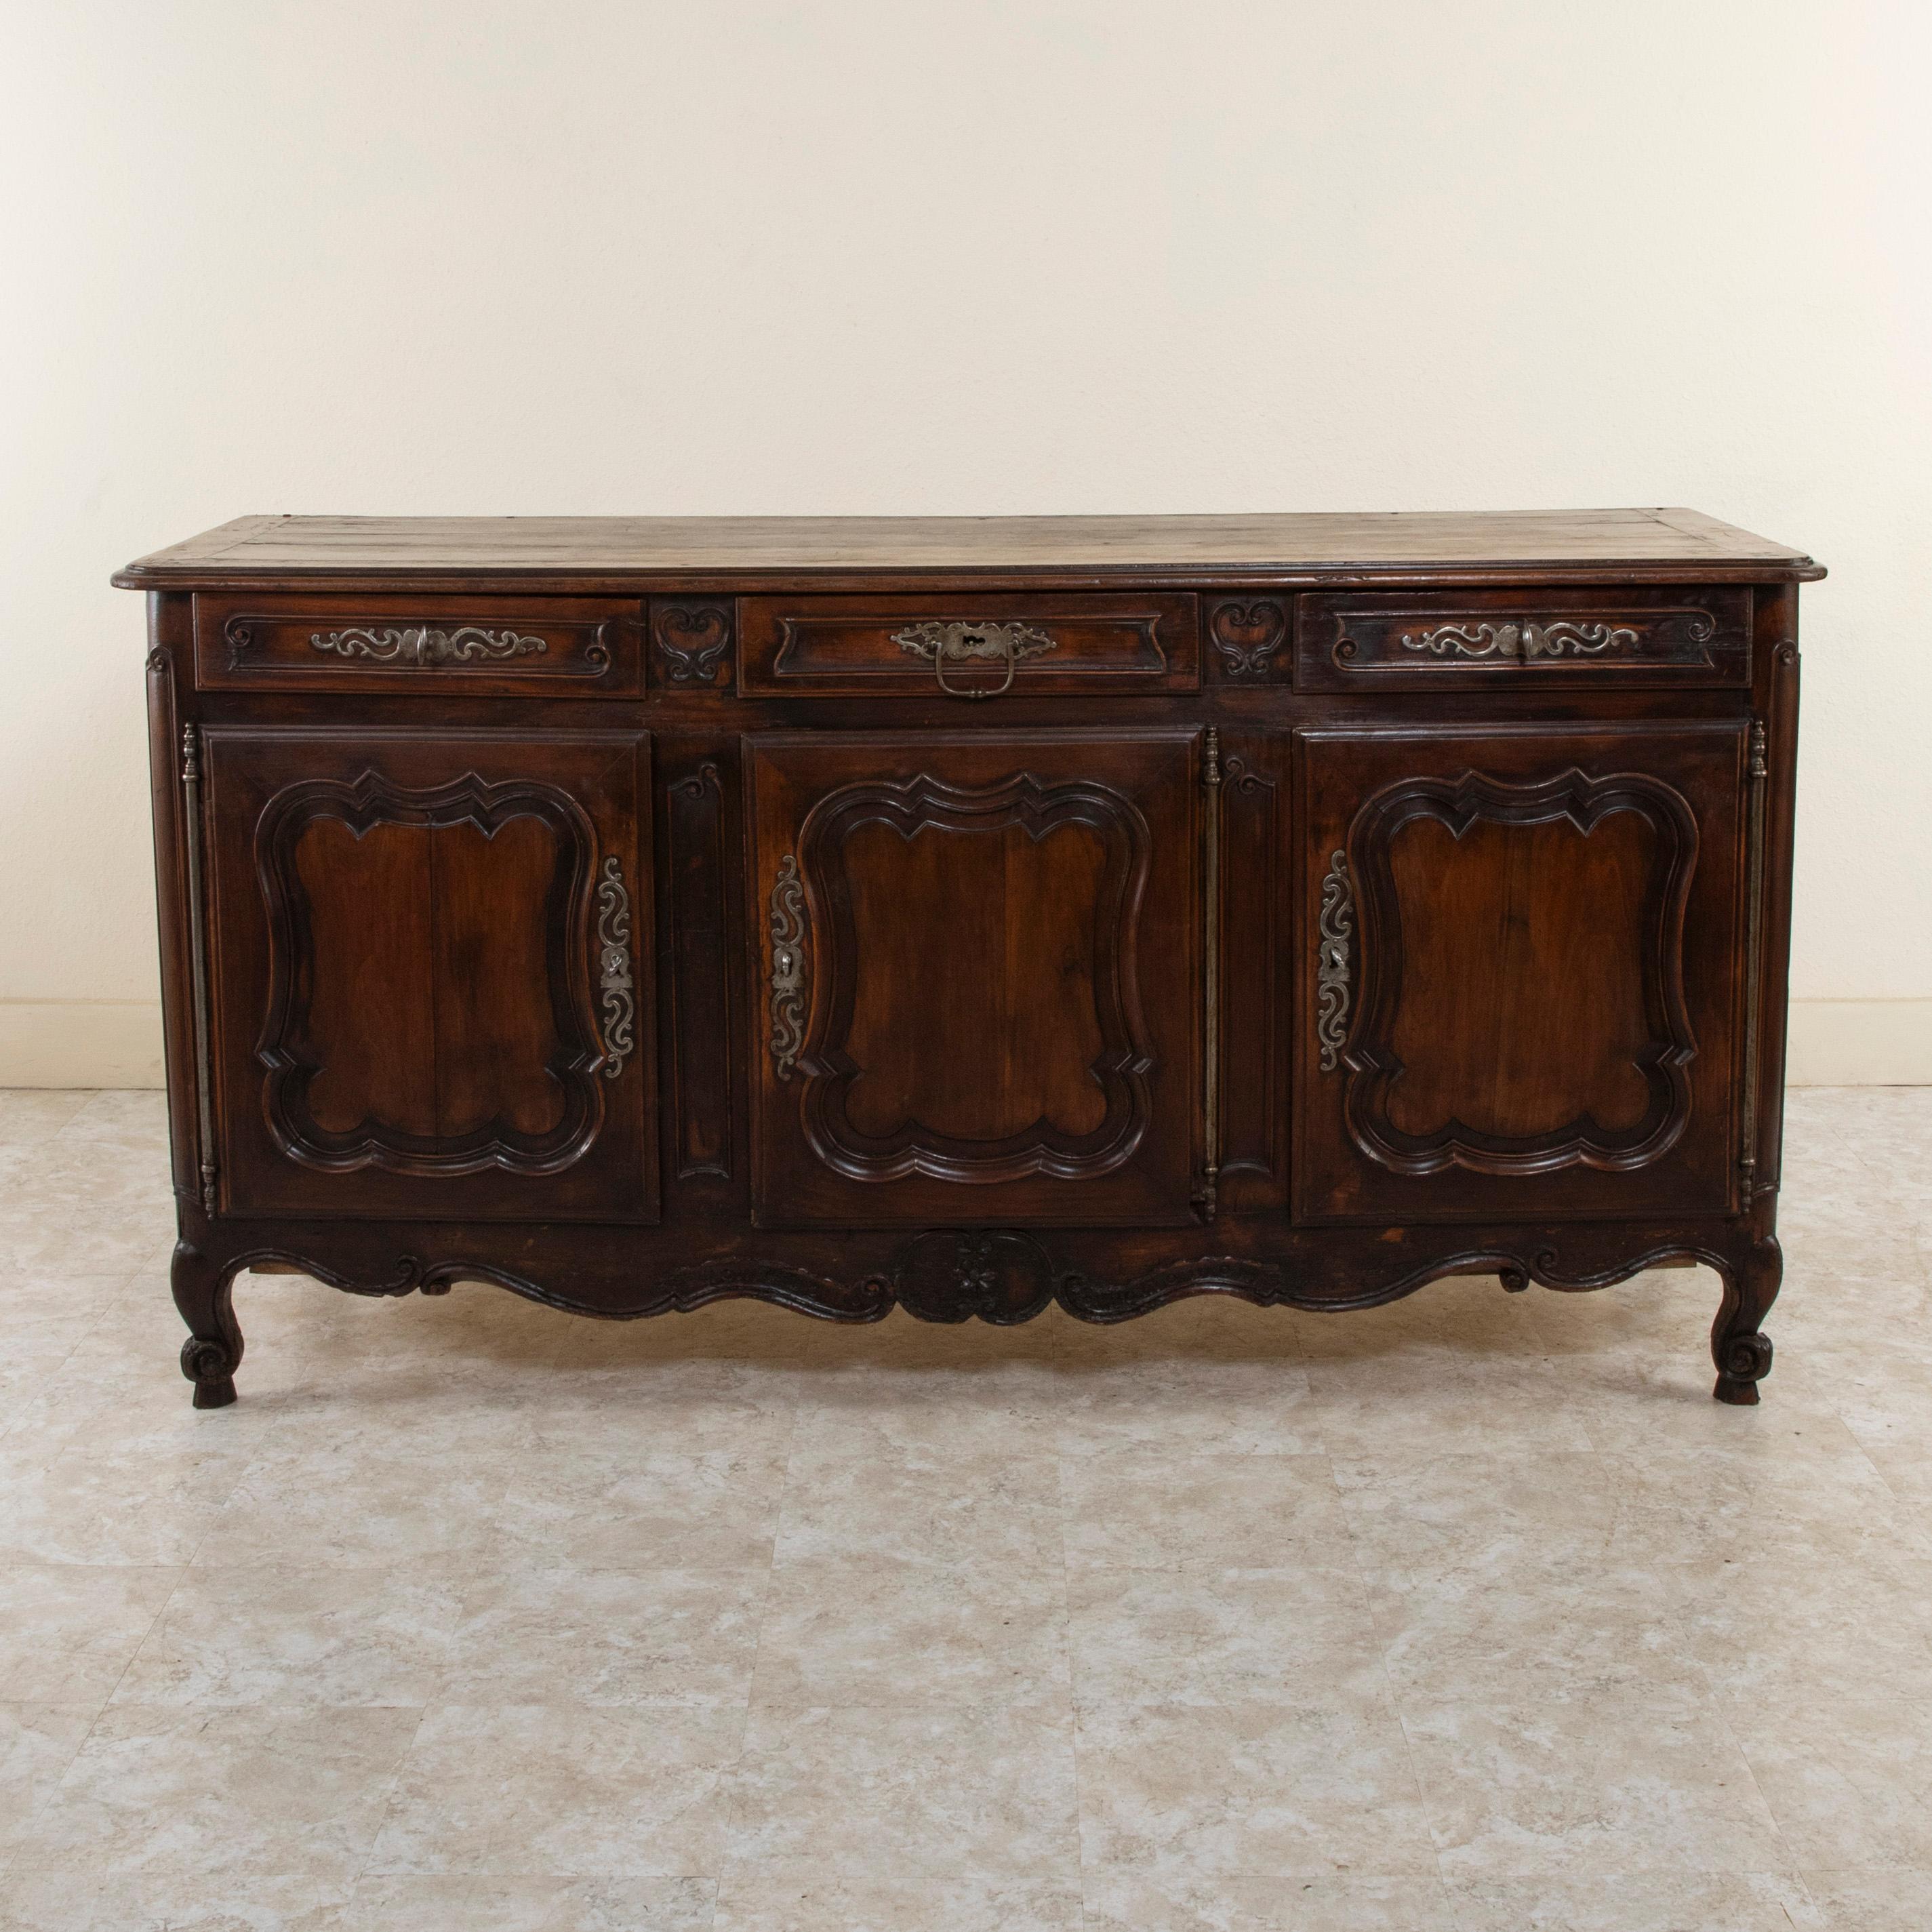 This late eighteenth century Louis XV style oak enfilade or sideboard features paneled sides and doors, and hand-carved scrolling. A carved floral motif adorns the lower apron. The back of the piece is also all hand hewn. Resting on classic